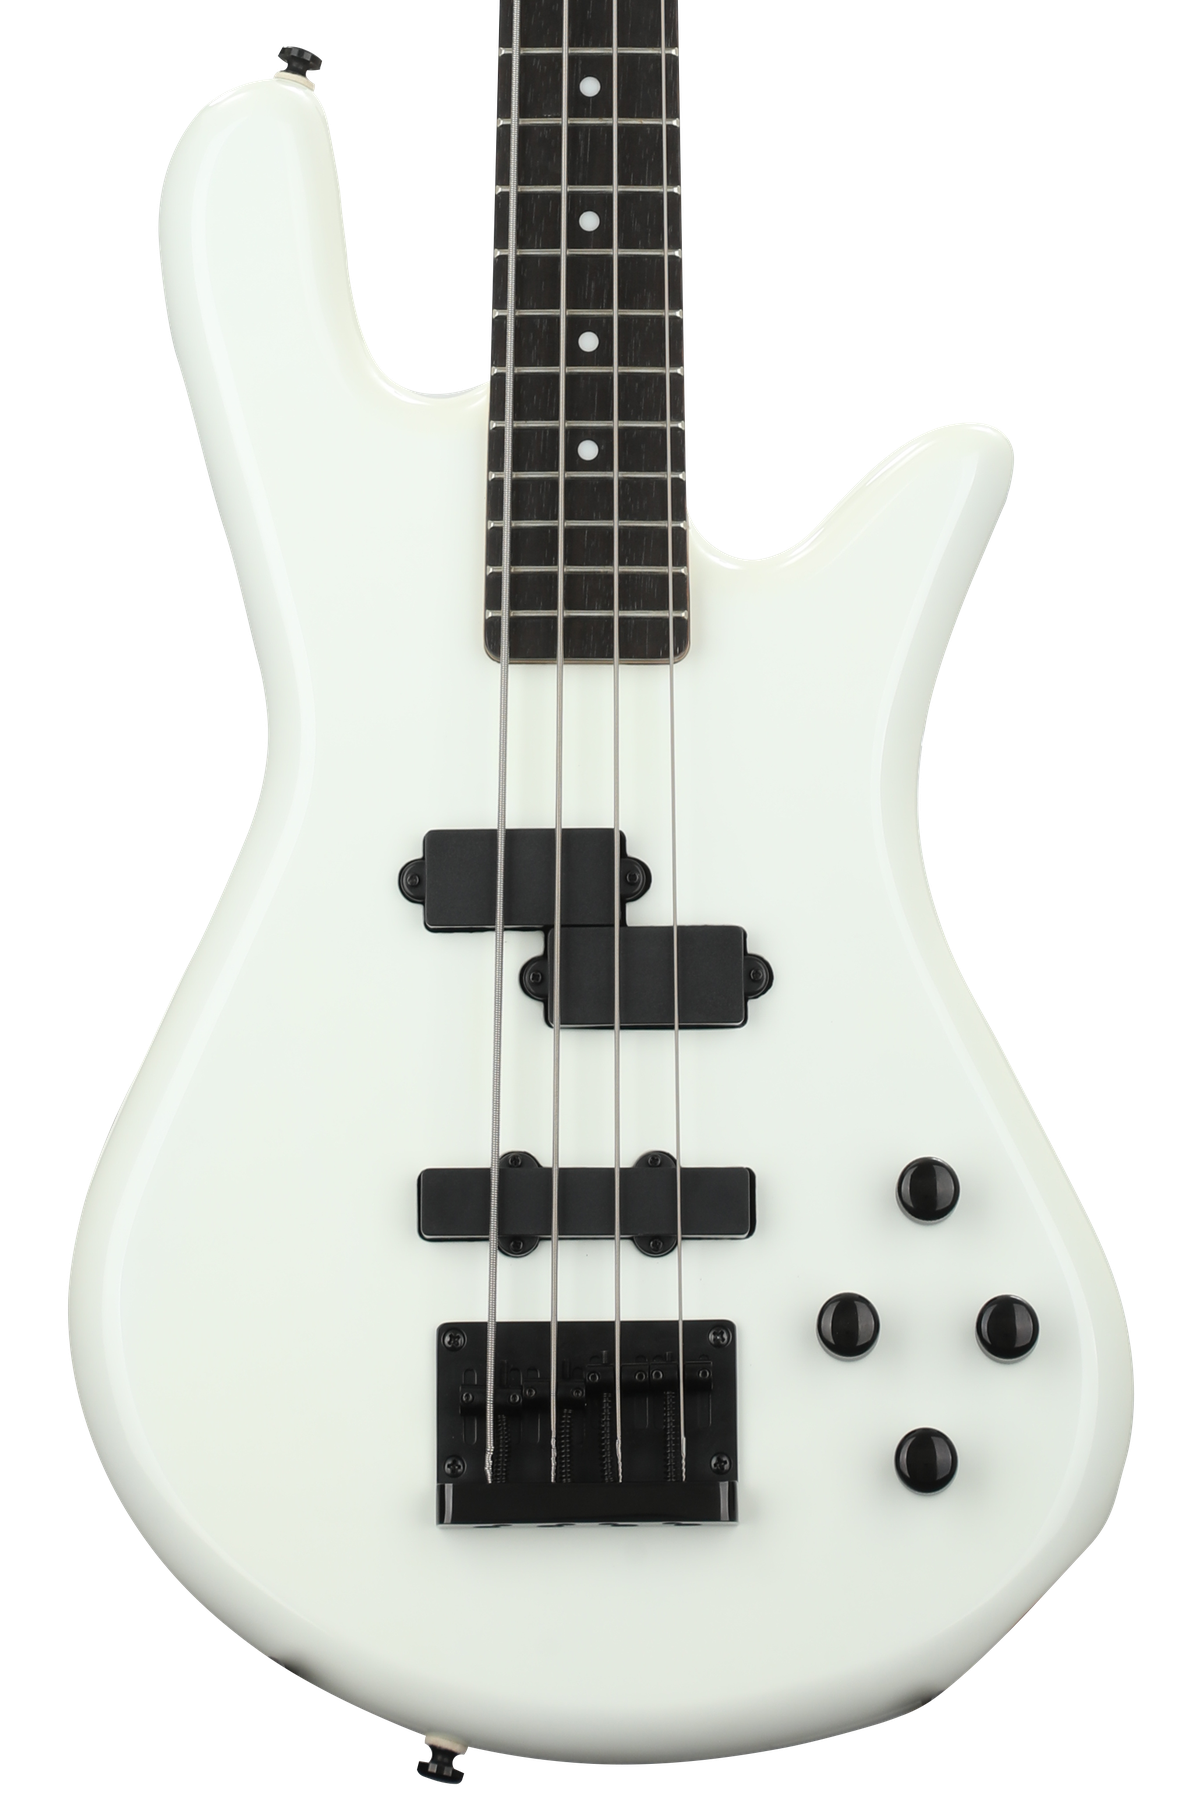 Spector Performer 4 Bass Guitar - Solid White Gloss | Sweetwater